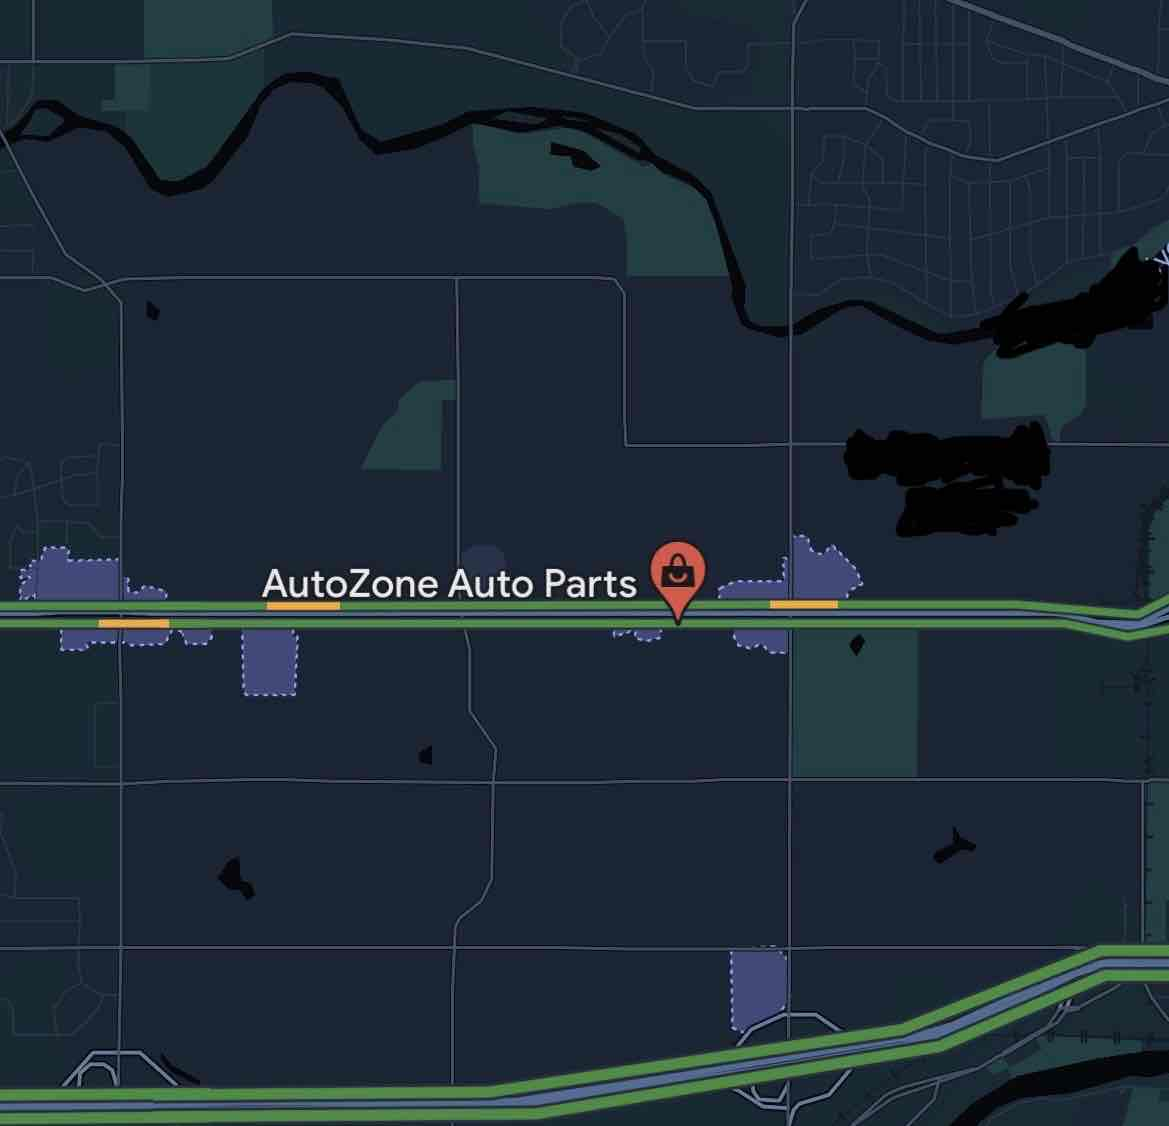 A map depicting an icon for Auto Zone on a straight section of road with no cross streets or curves.